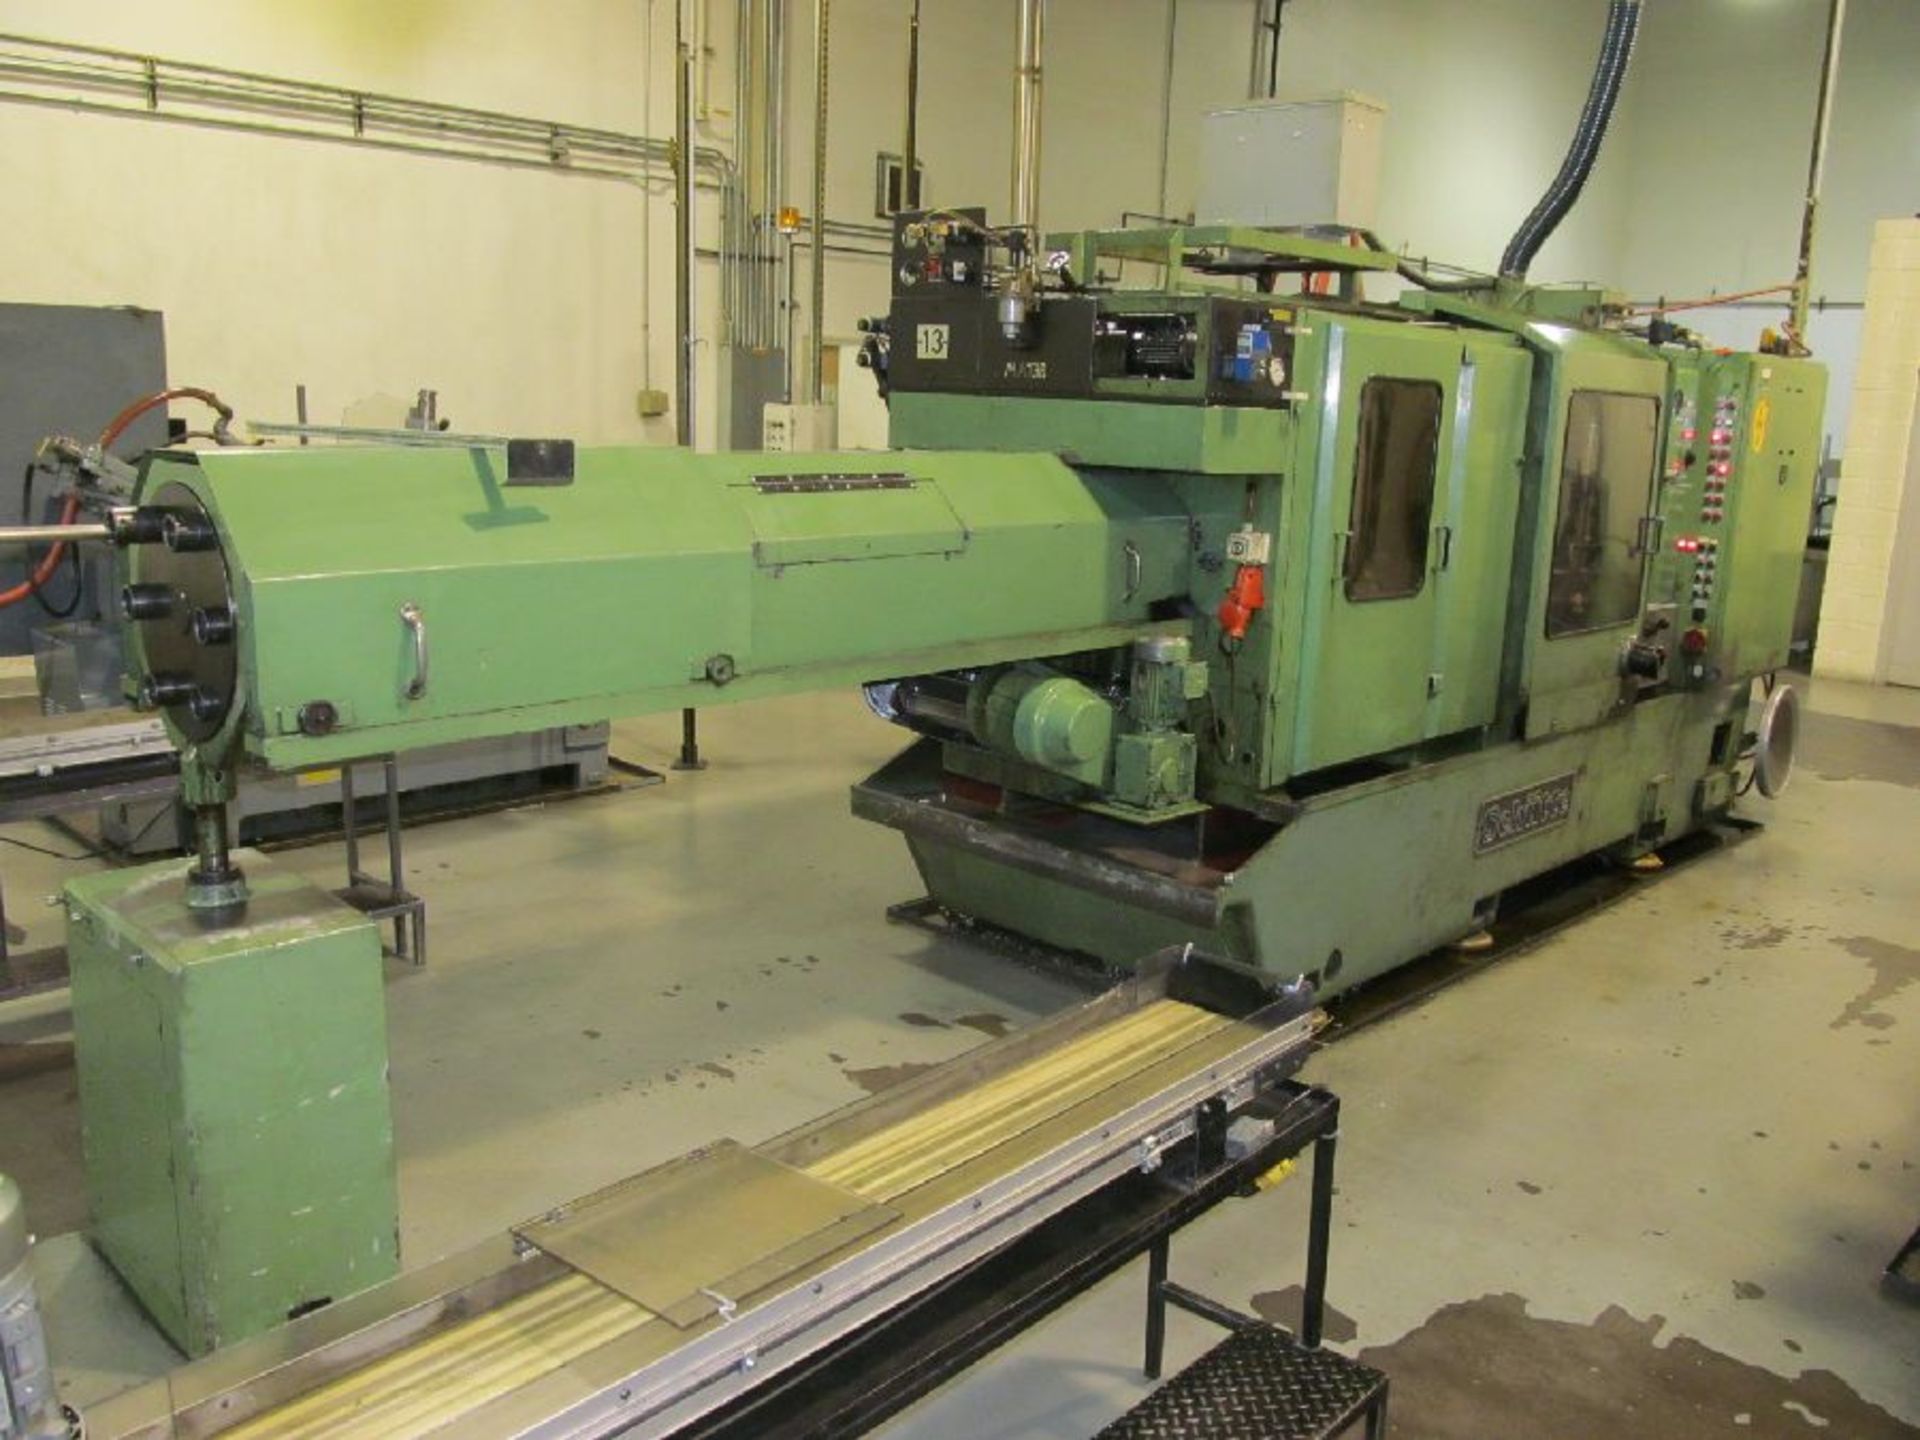 Schutte Model SF42 42mm (1.65") 6-Spindle Automatic Screw Machine - Image 4 of 6